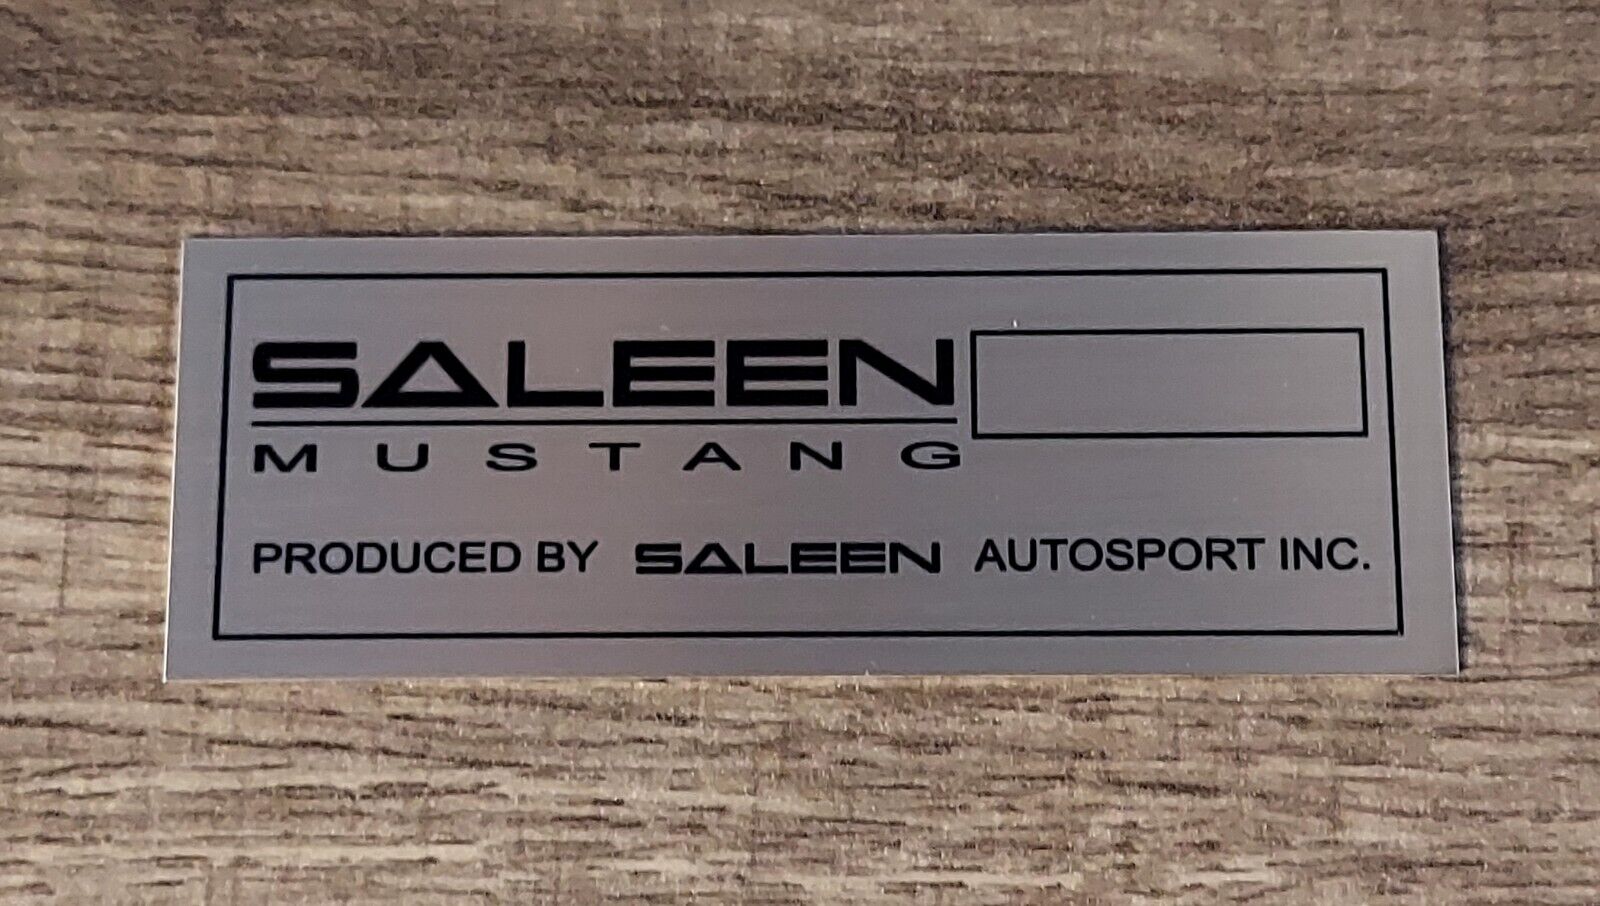 Oem Saleen mustang metal emblem rare only one available anywhere